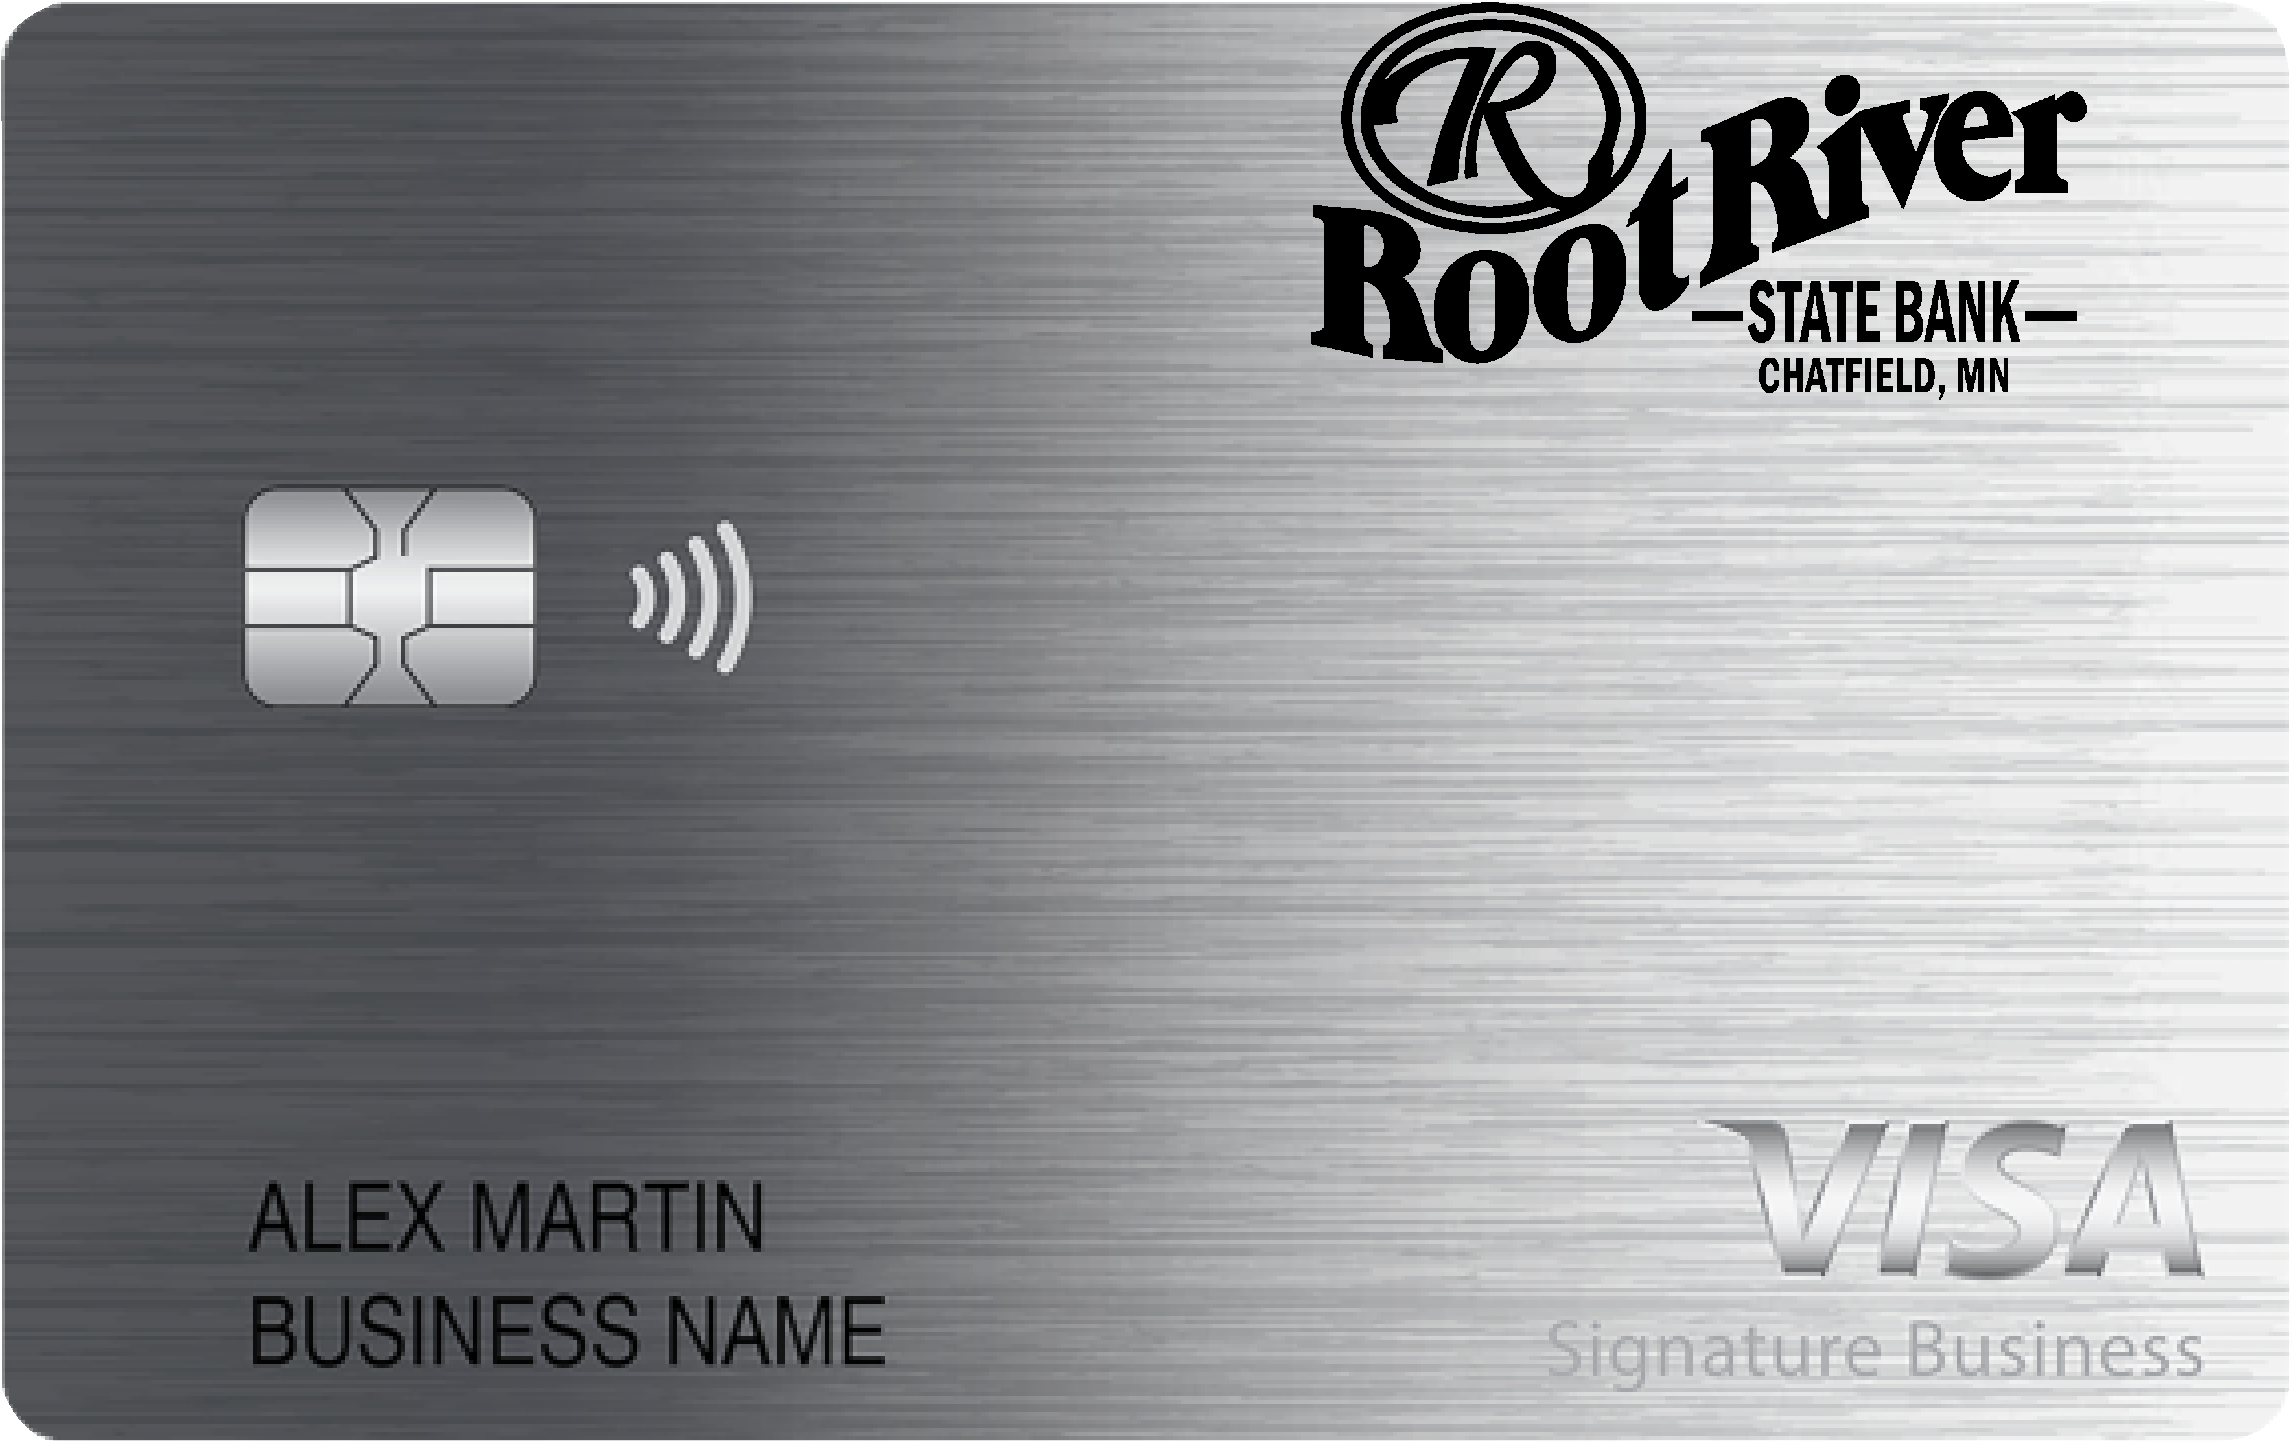 Root River State Bank Smart Business Rewards Card